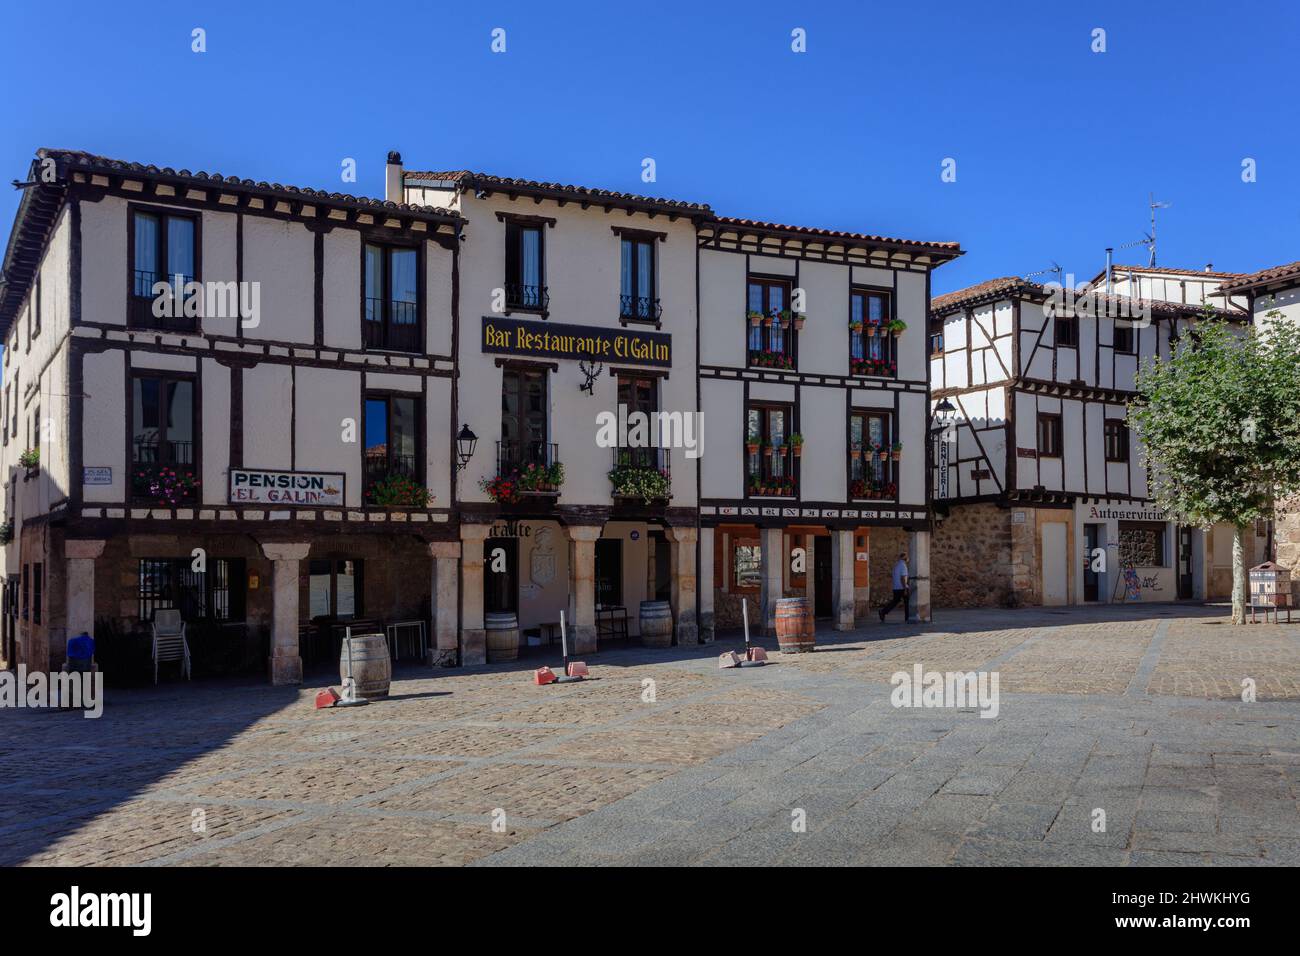 Typical houses of Covarrubias, a medieval town in the province of Burgos. Spain. It is considered one of the most beautiful village of Castilla y Leon Stock Photo